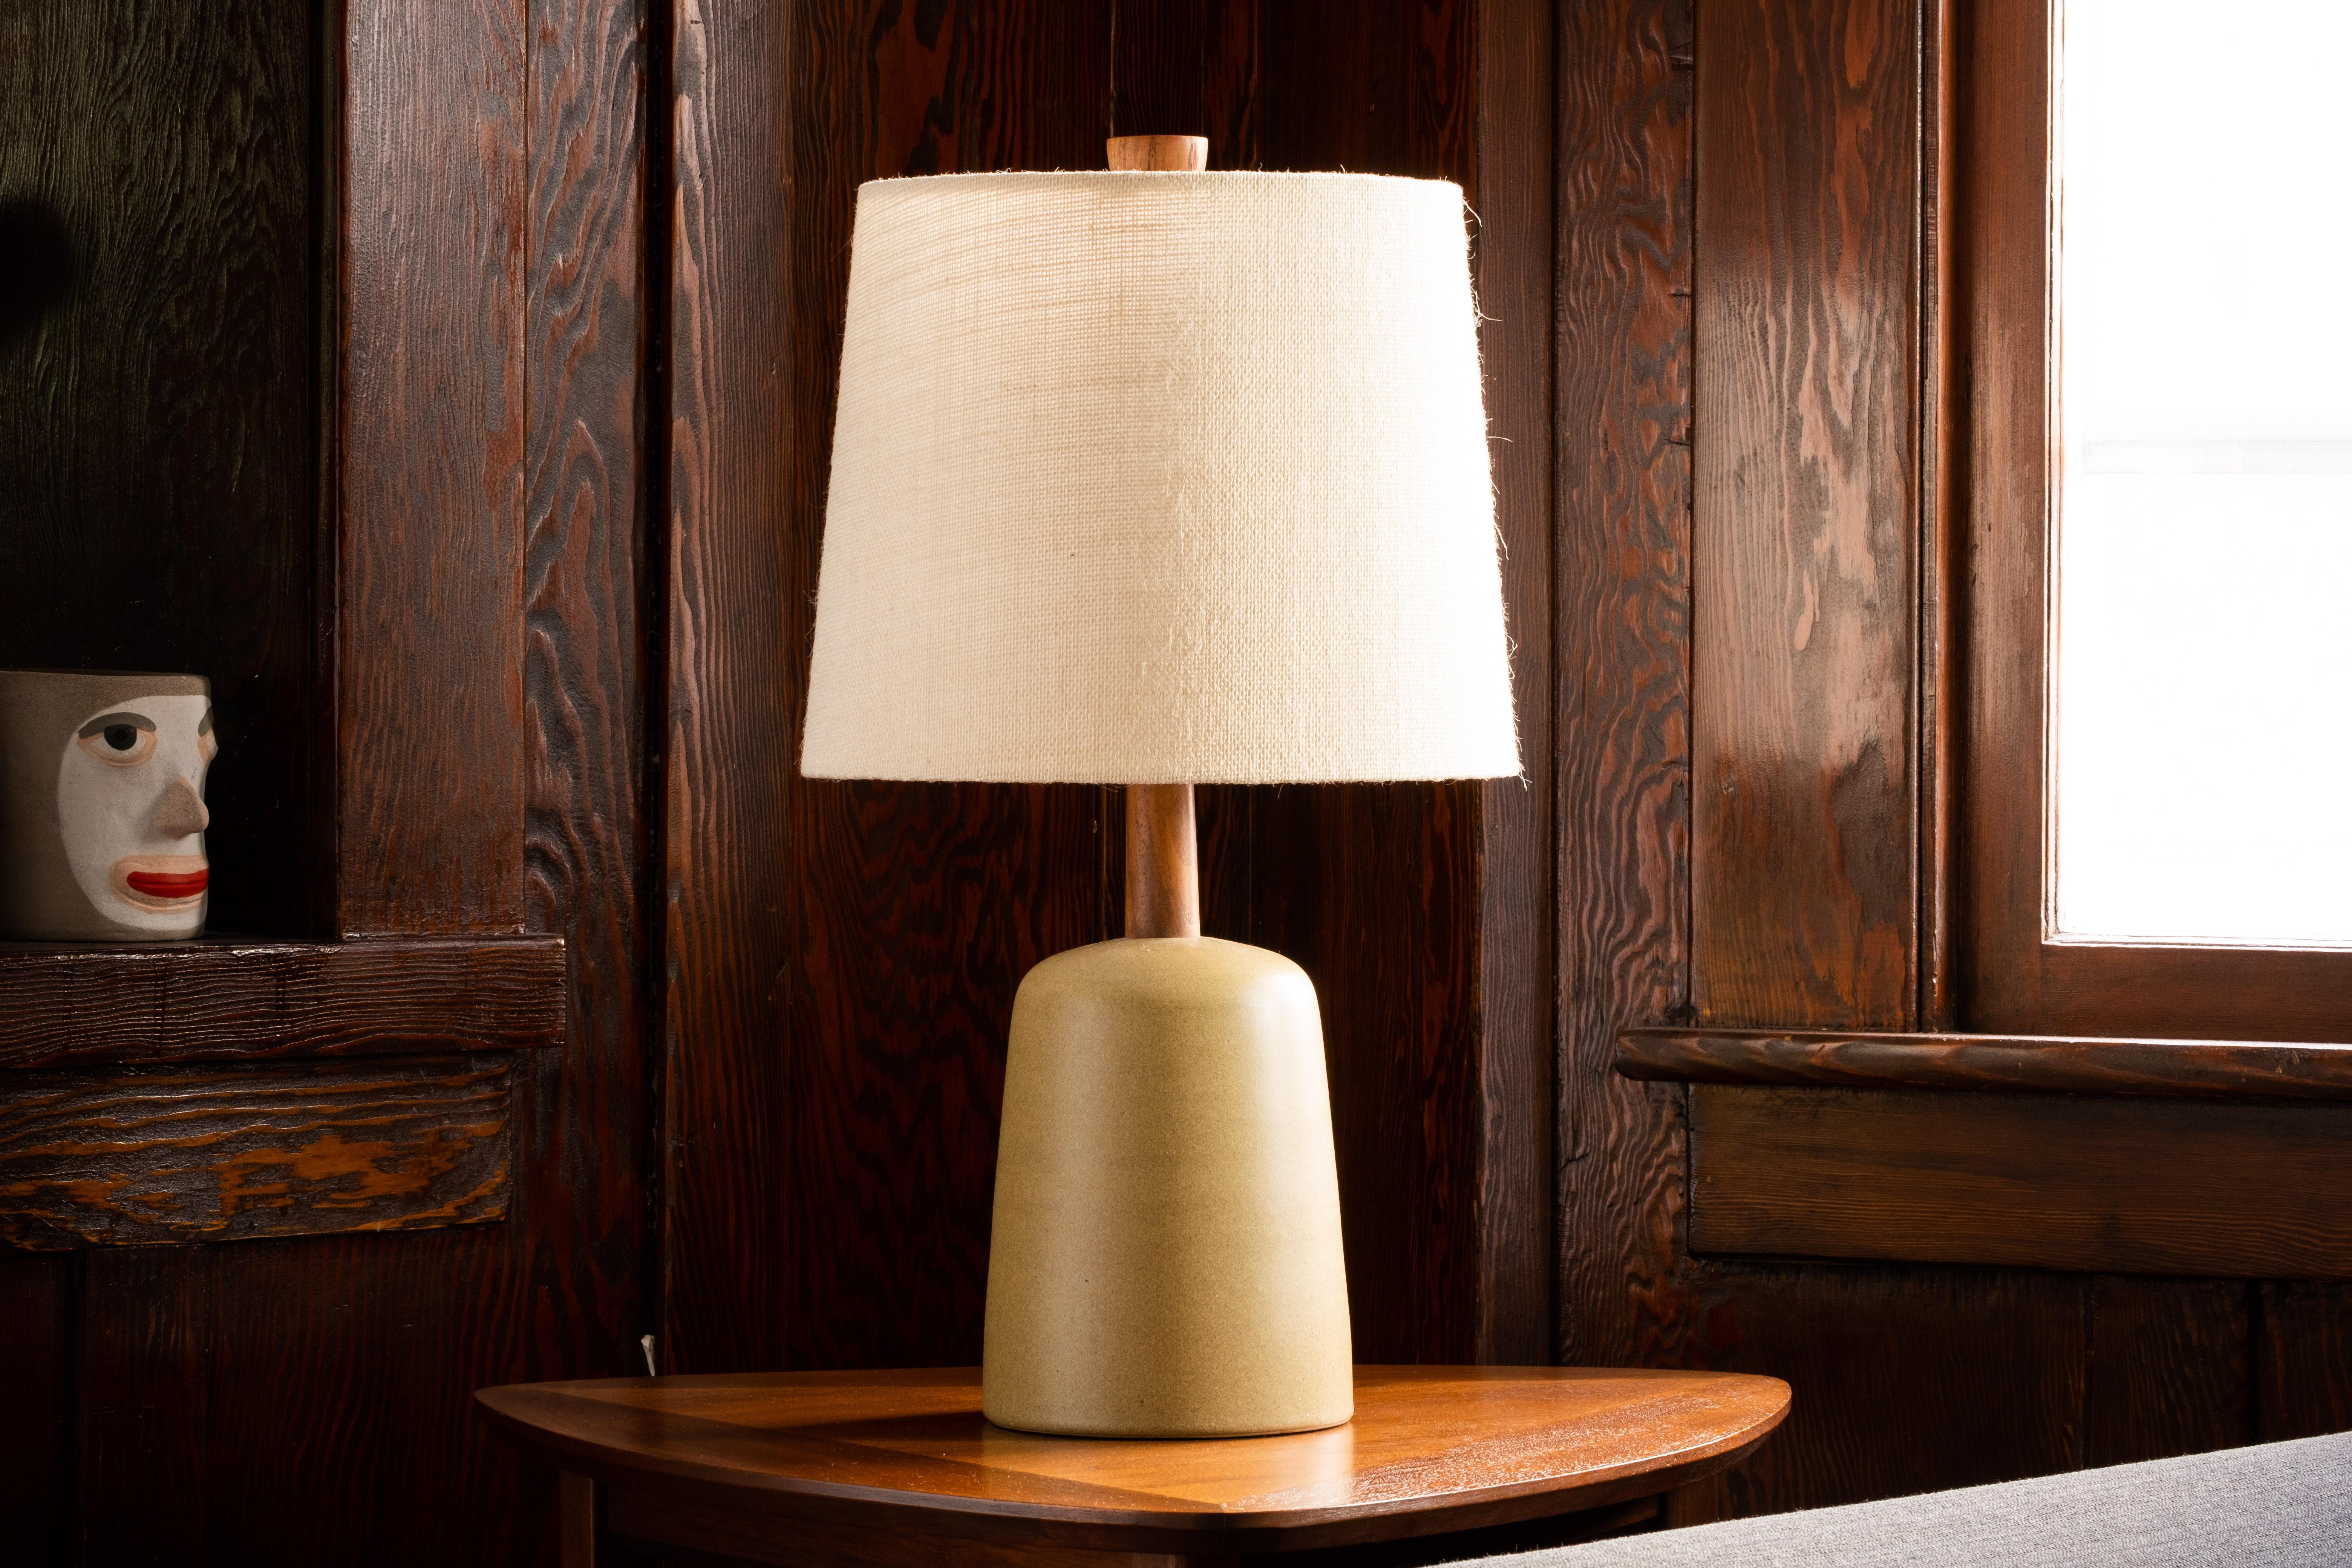 What is it?
—
This unusual Martz lamp comes in a matte yellow glaze. Let's call the color, 